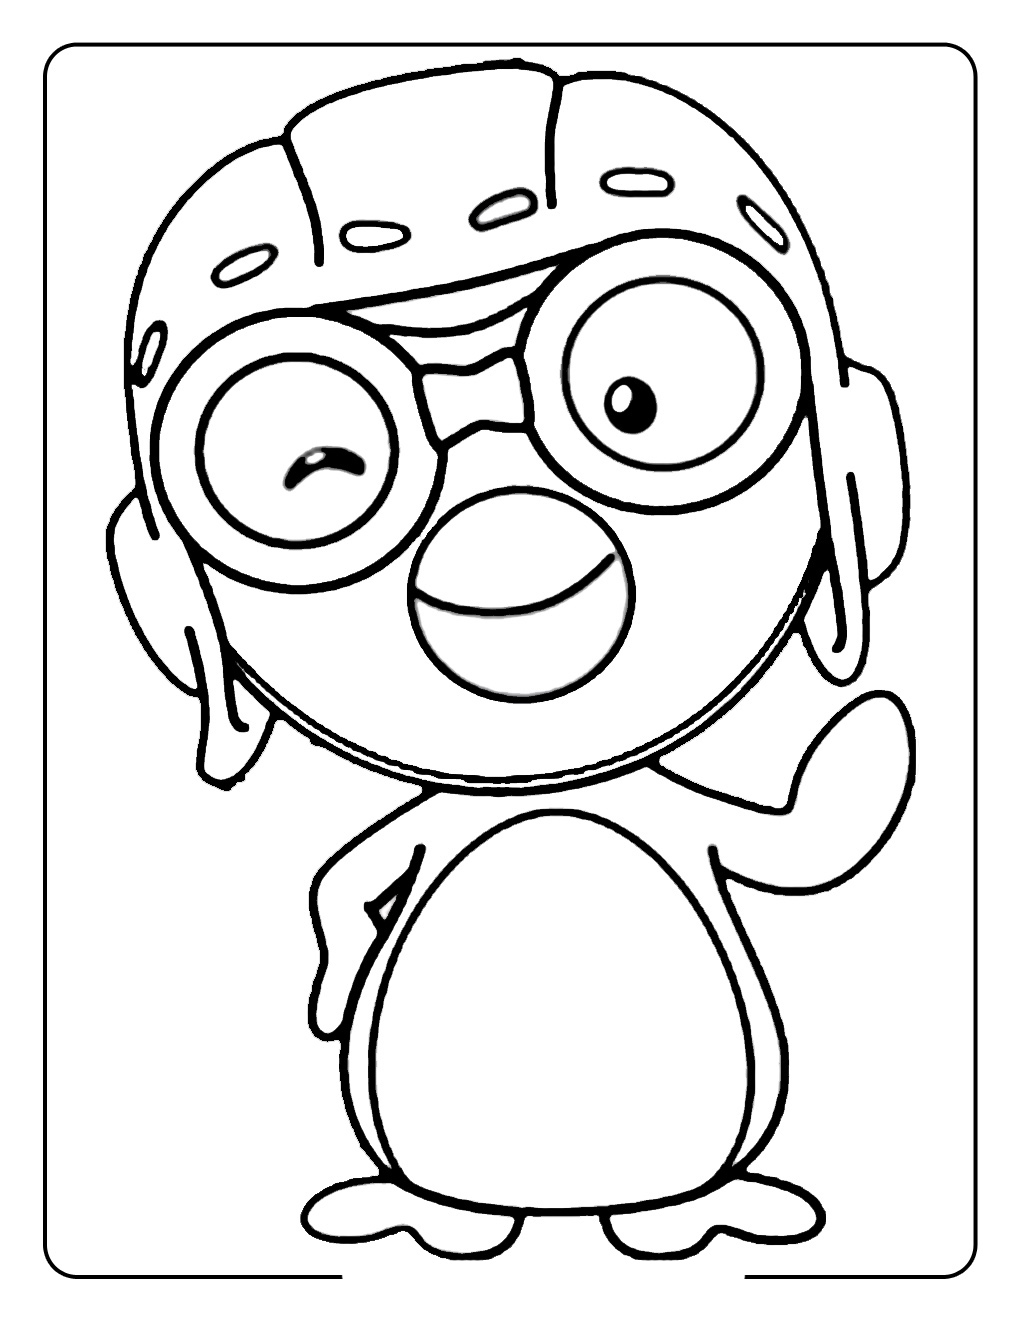 penguin colouring sheet cute penguin coloring pages download and print for free sheet penguin colouring 